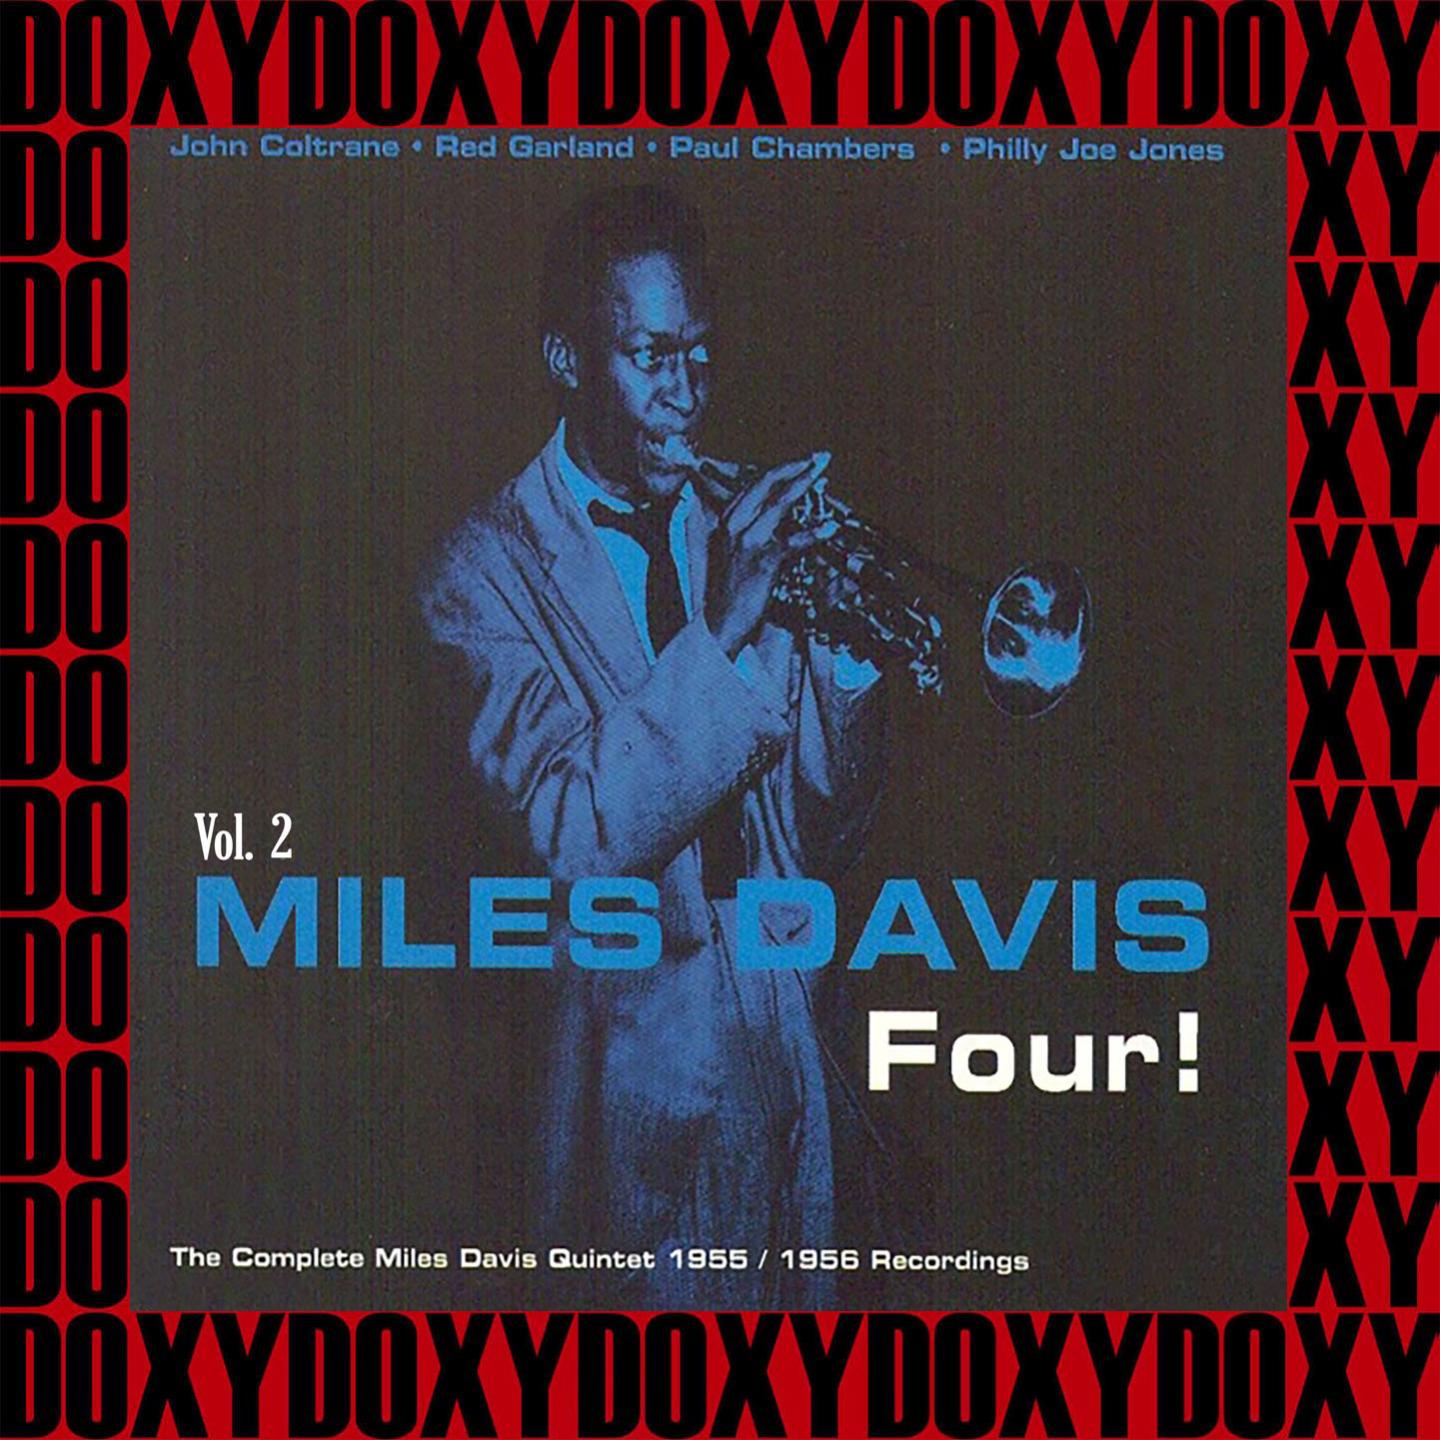 Four! The Complete Miles Davis Quintet 1955-1956 Recordings, Vol. 2 (Hd Remastered Edition, Doxy Collection)